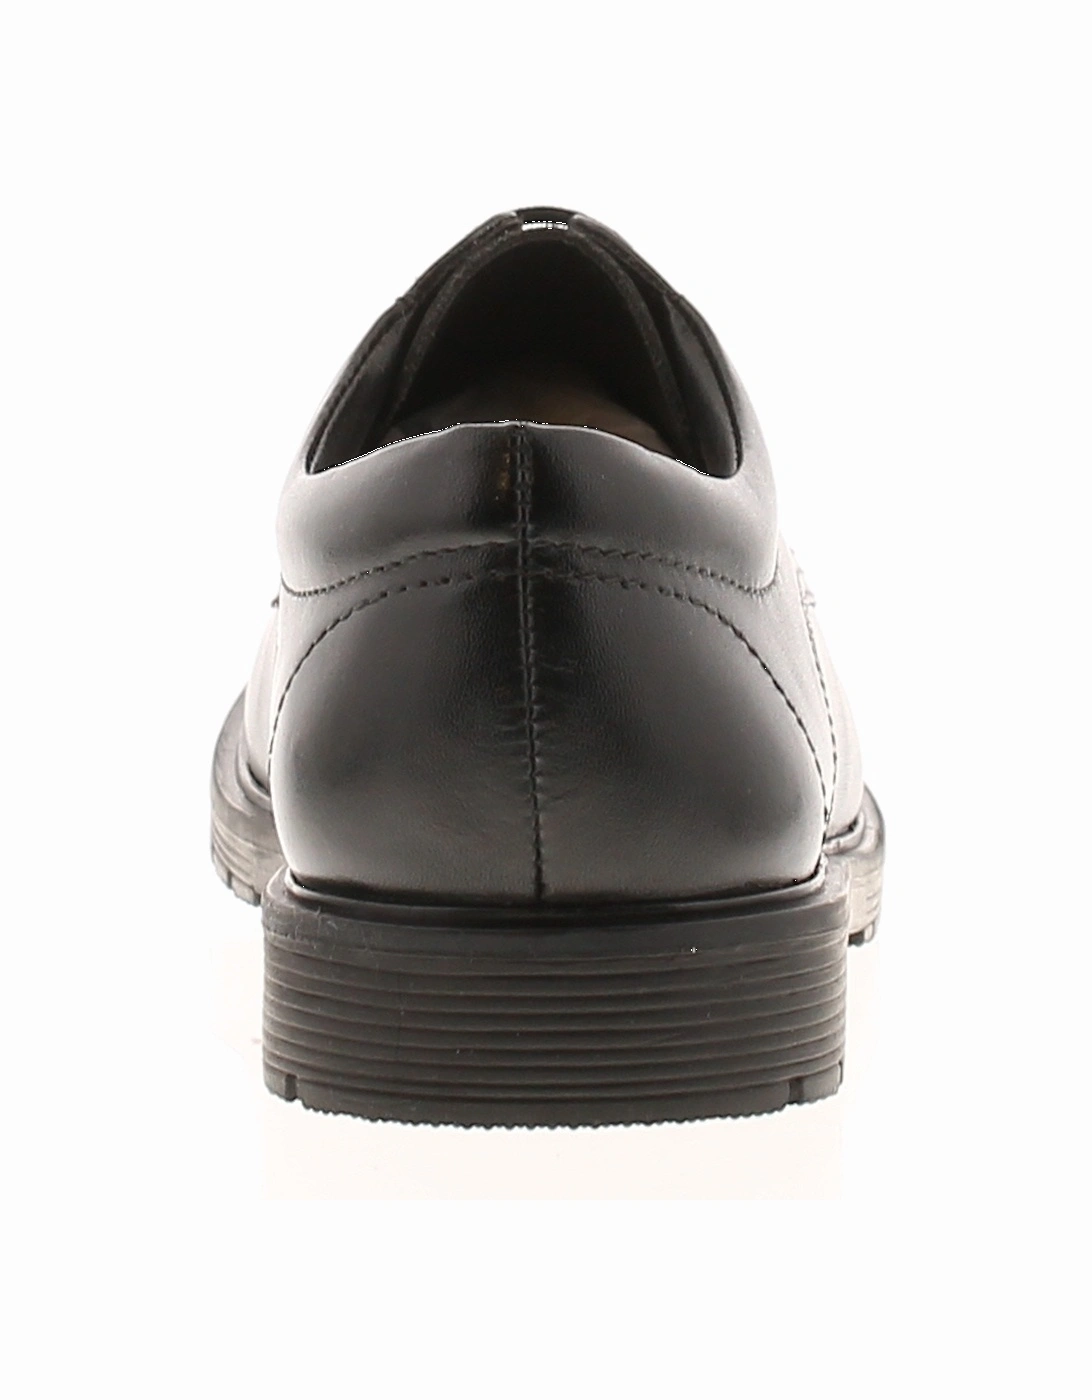 Girls Shoes School Lolly Leather black UK Size